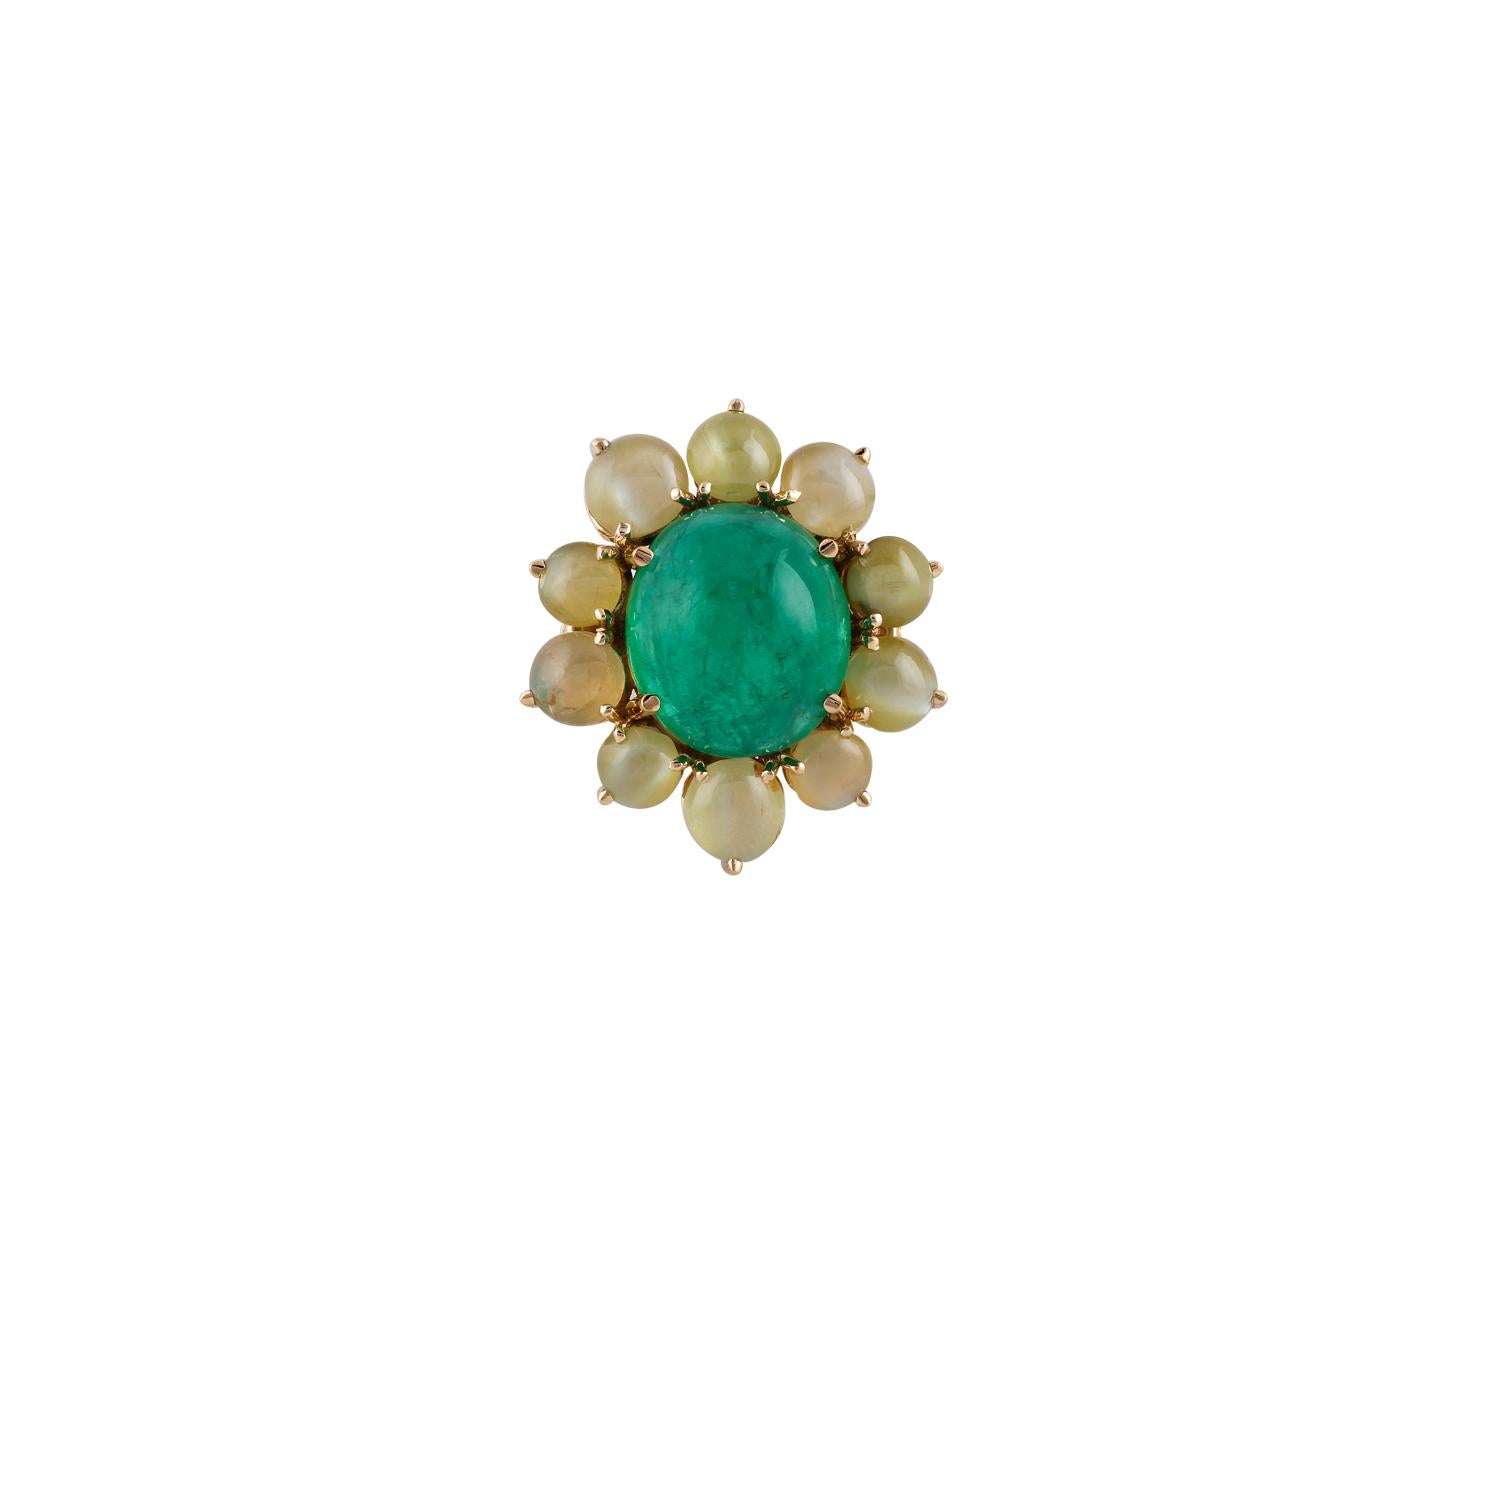 A one of a kind, cabochon Zambian Emerald weighing (7.30 carats) with Cats Eye Cluster

Cats Eye - 6.40 Carat 
Gold 18K  Yellow 
 

The ring is currently sized at US 7.5
Ring Can be Resized And Ring come Along With Prestation Box.

Please feel free